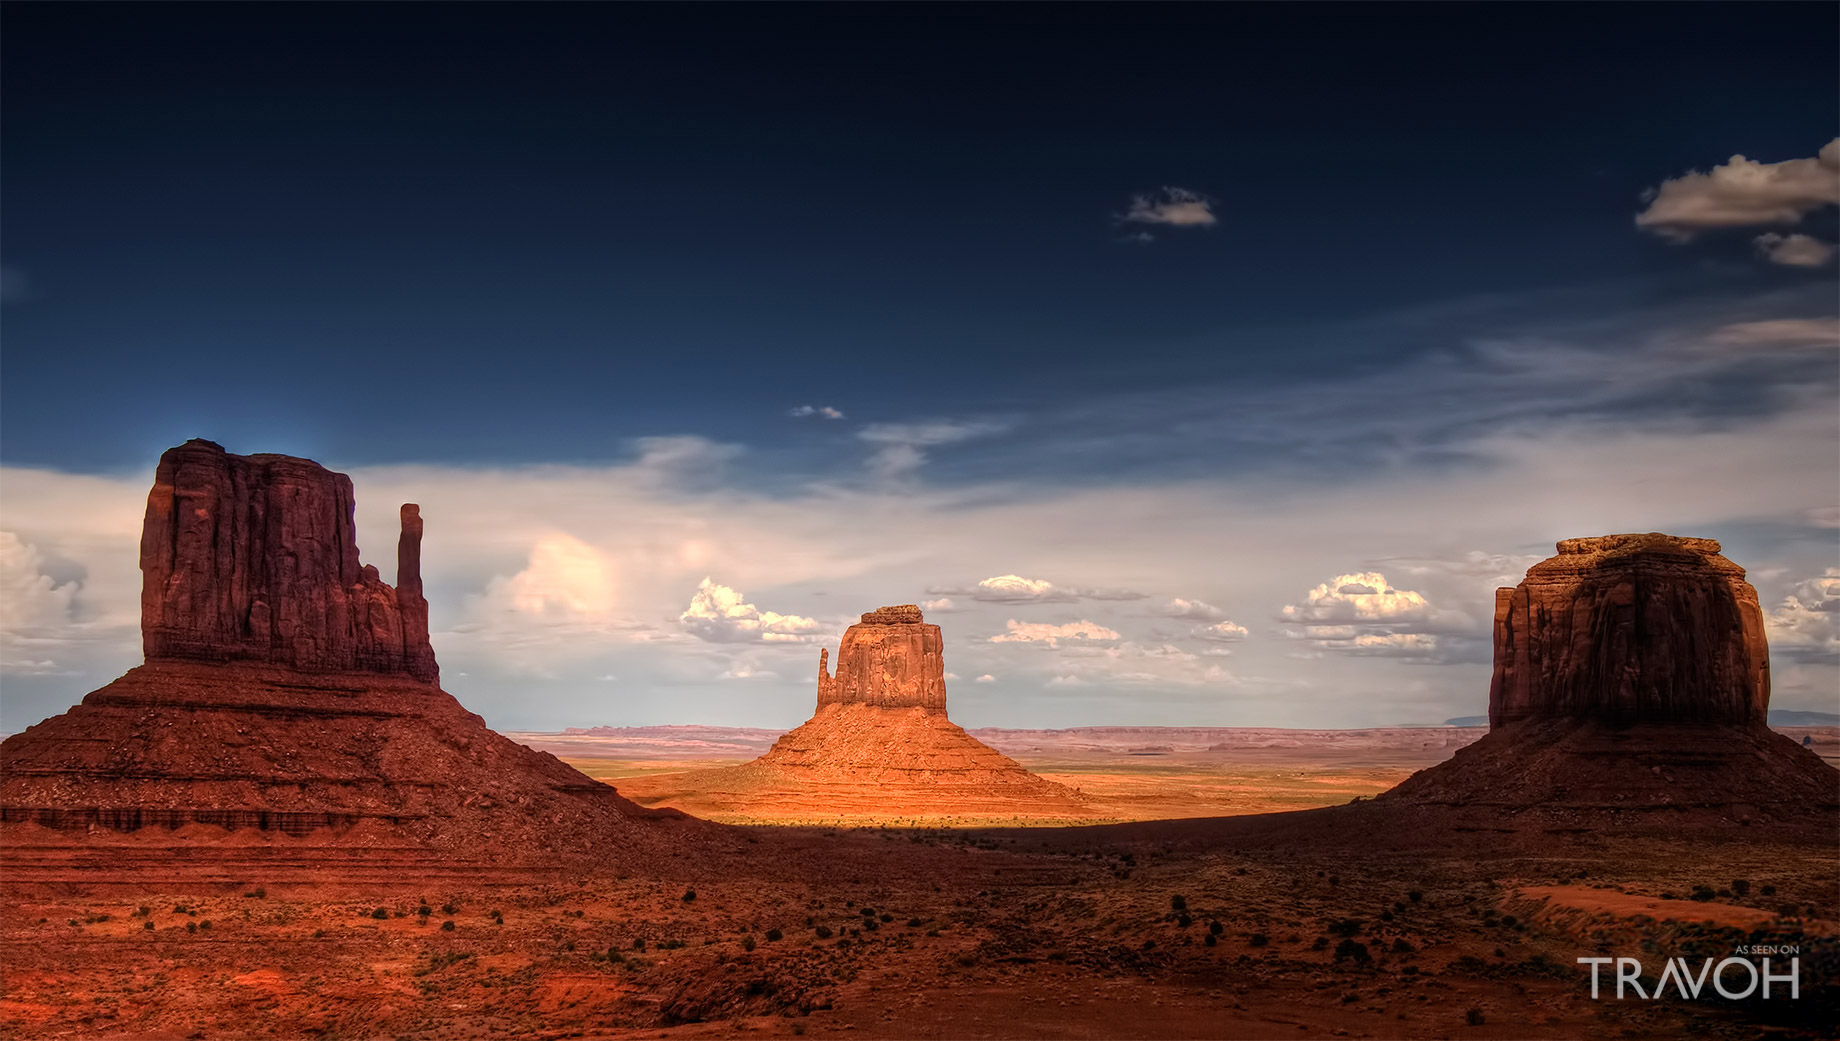 Monument Valley - A Daunting Region of the Colorado Plateau on the Arizona-Utah State Line